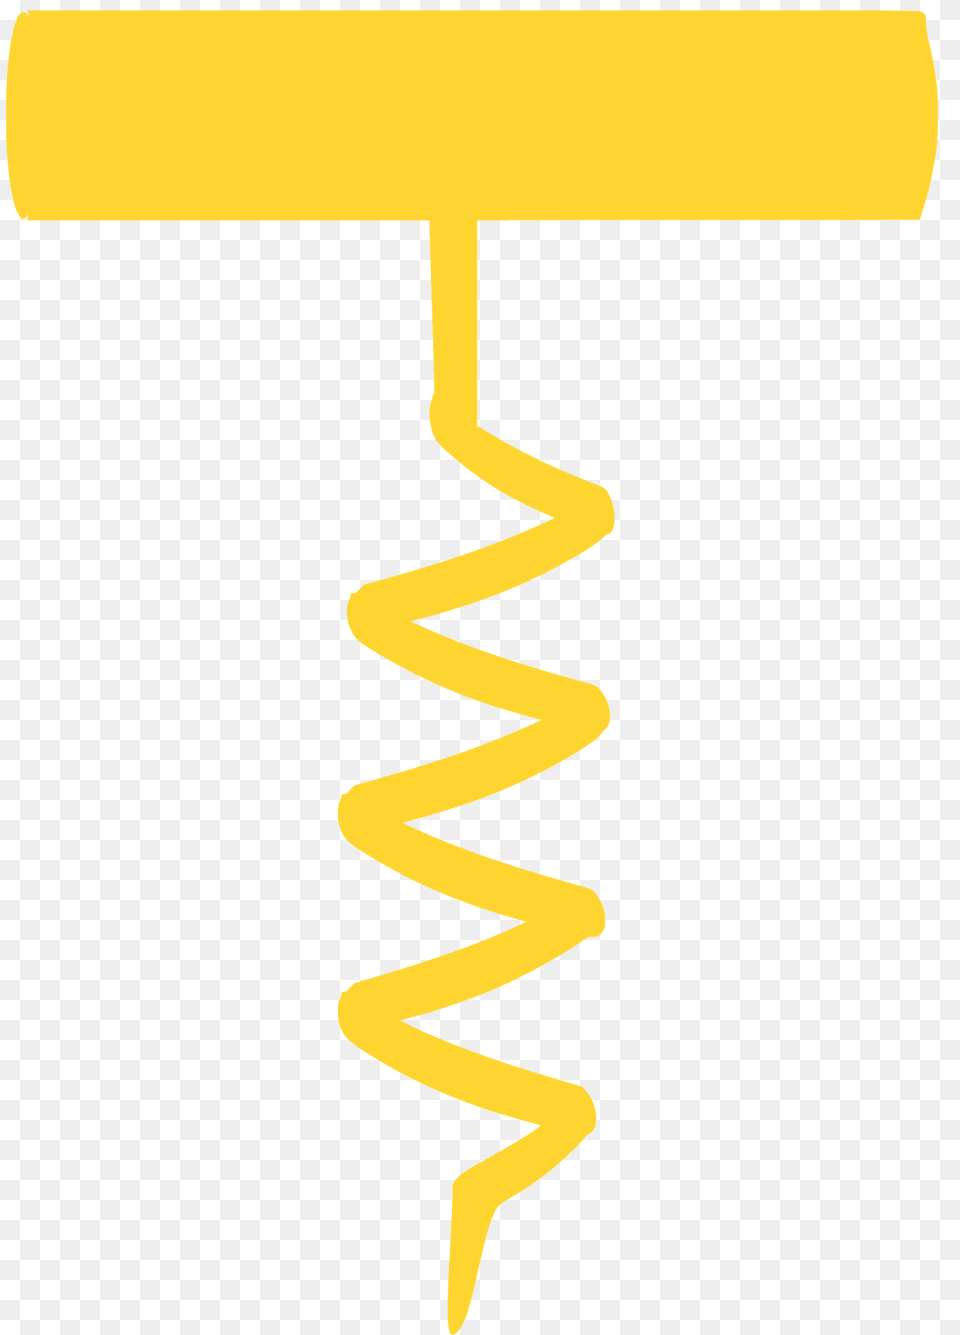 Corkscrew Silhouette, Coil, Spiral Free Png